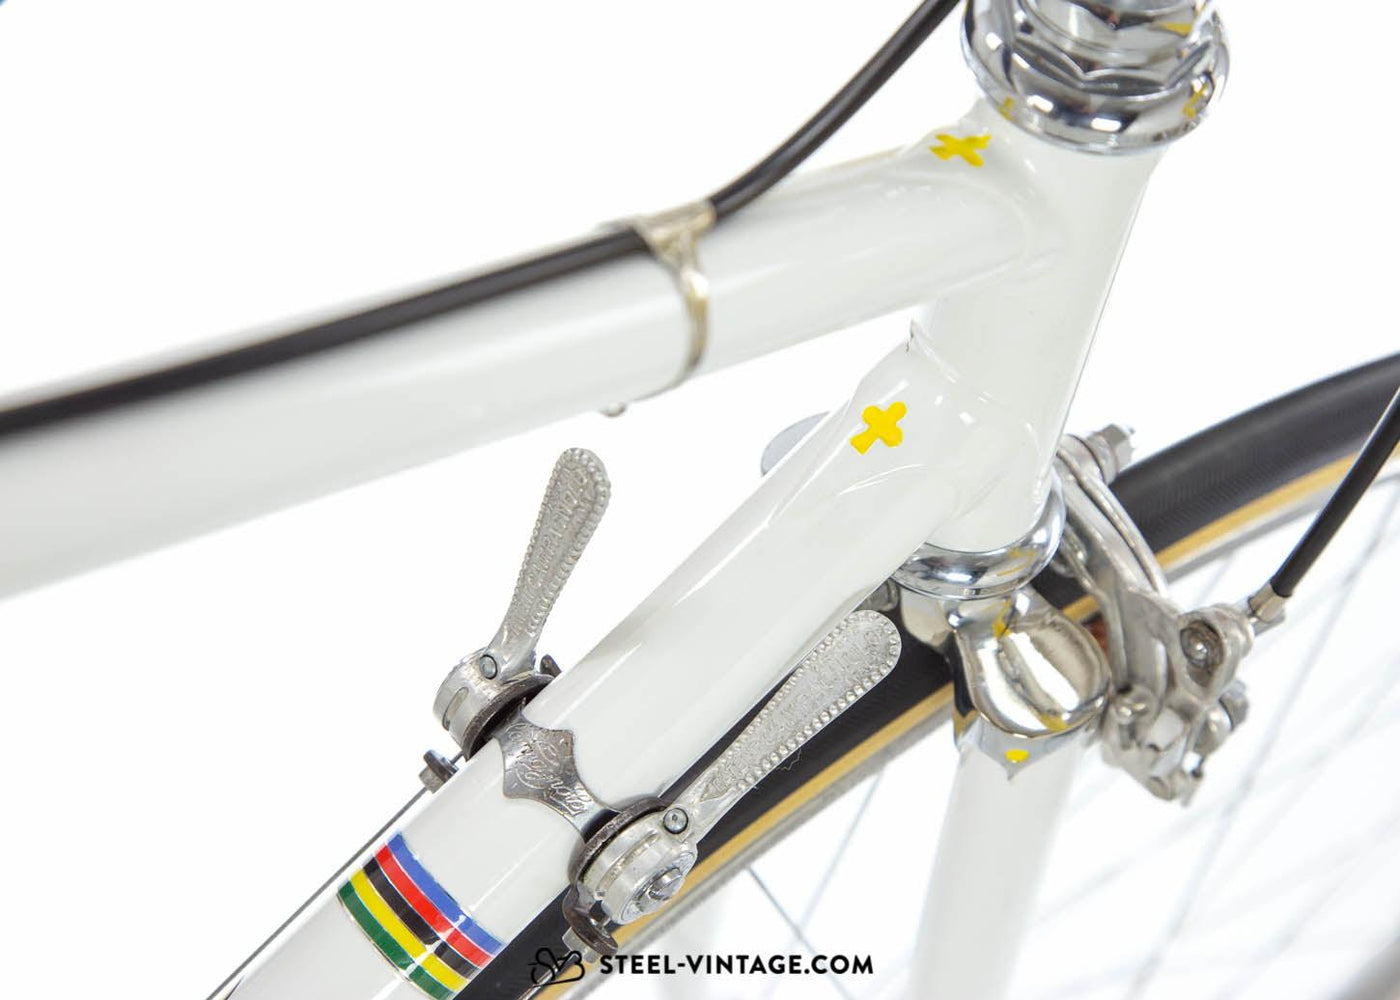 Colnago Super Roma Collectible Road Bicycle from 1968 - Steel Vintage Bikes